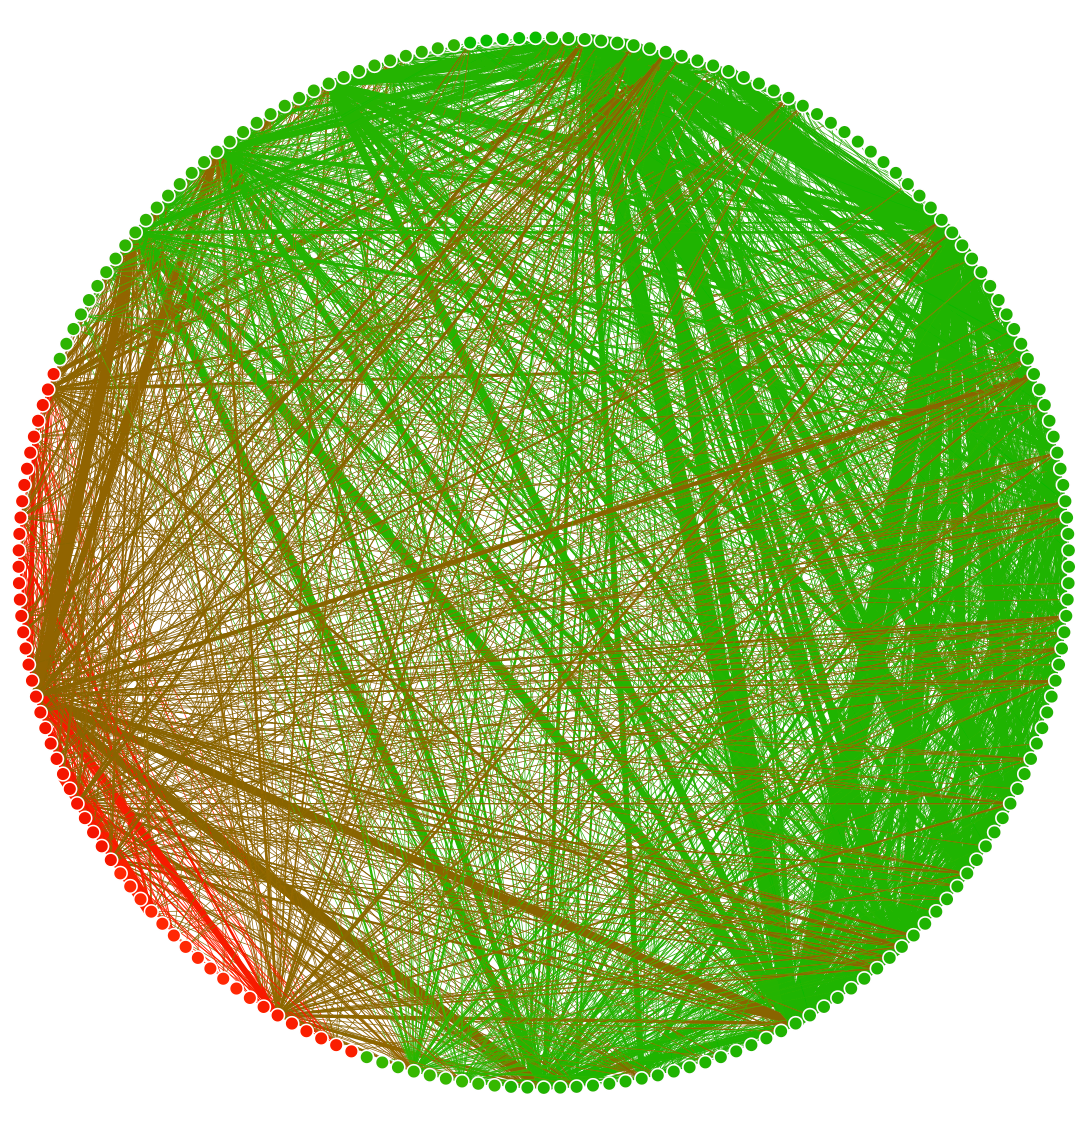 network-diagram-new-guinea.png